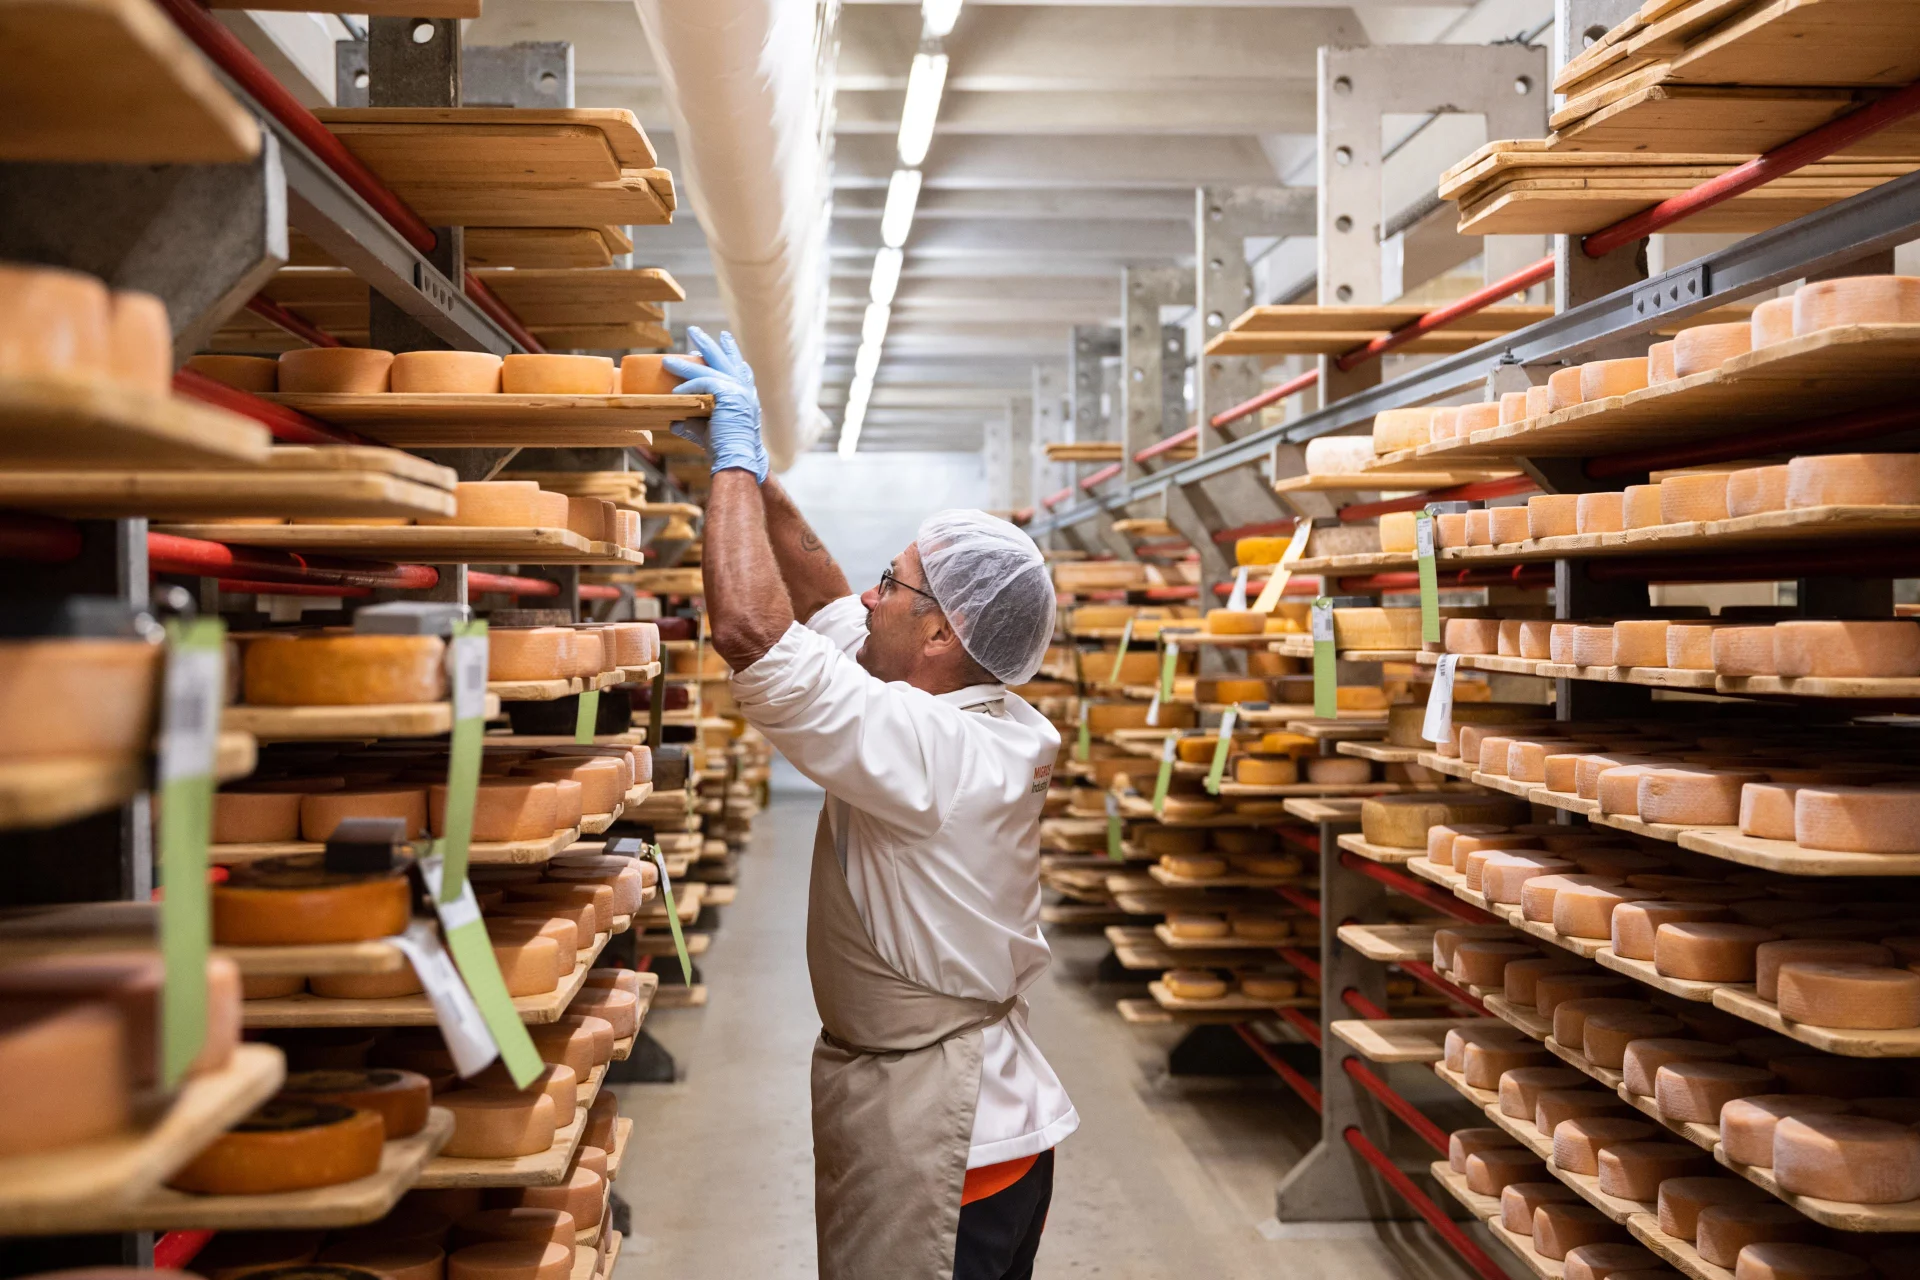 An employee brings wheels of cheese to the cheese warehouse to ripen